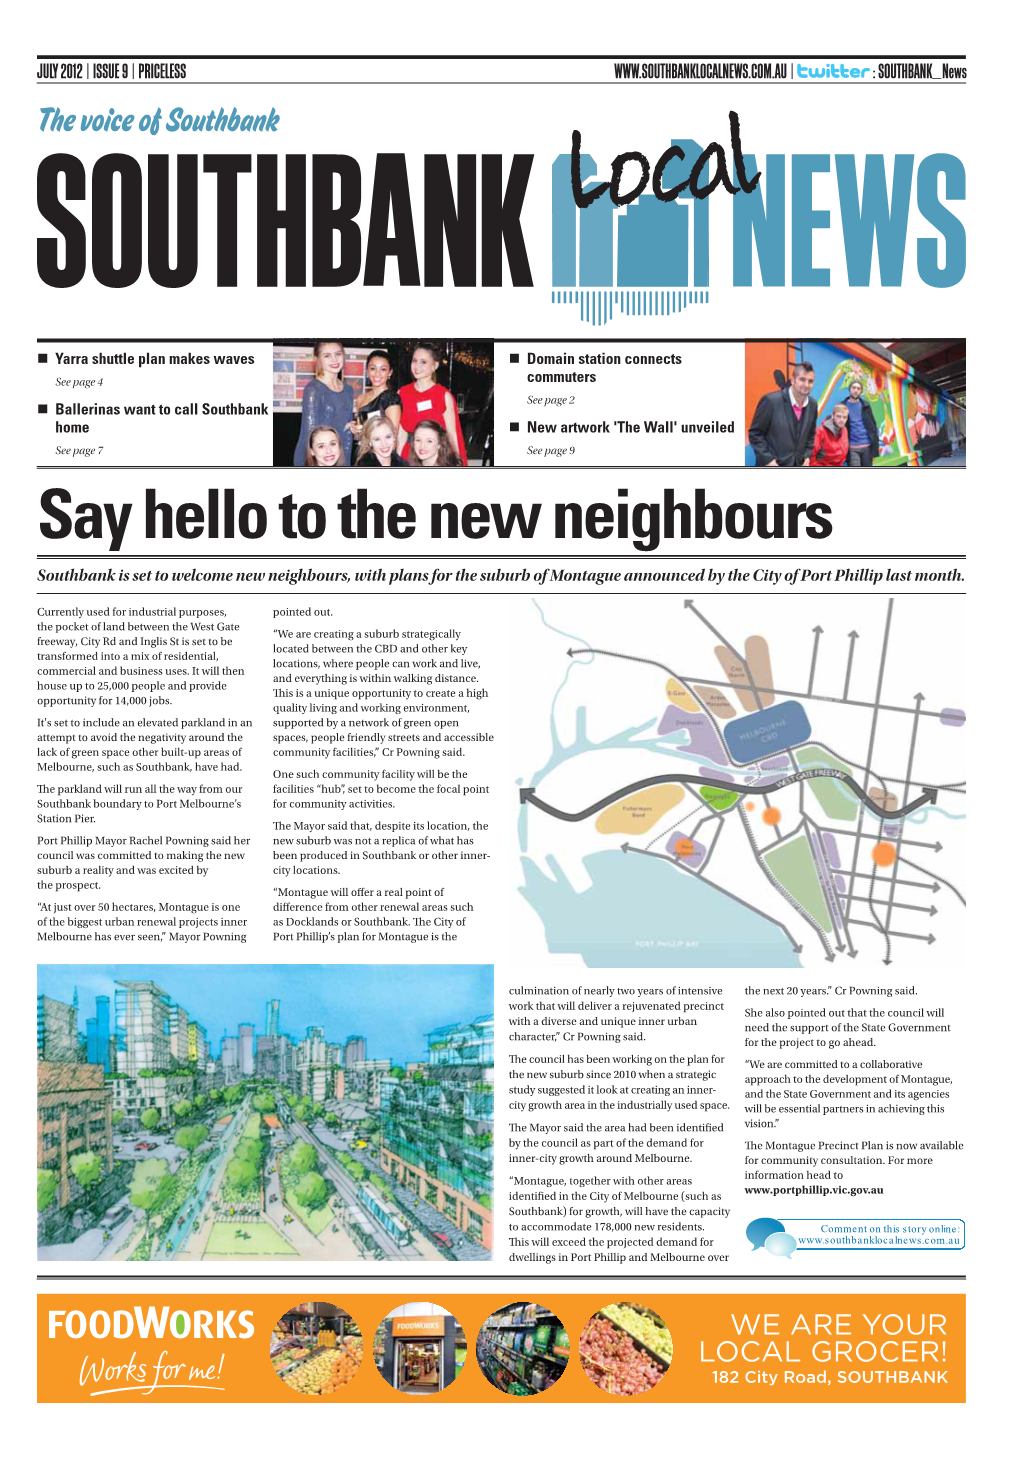 Say Hello to the New Neighbours Southbank Is Set to Welcome New Neighbours, with Plans for the Suburb of Montague Announced by the City of Port Phillip Last Month